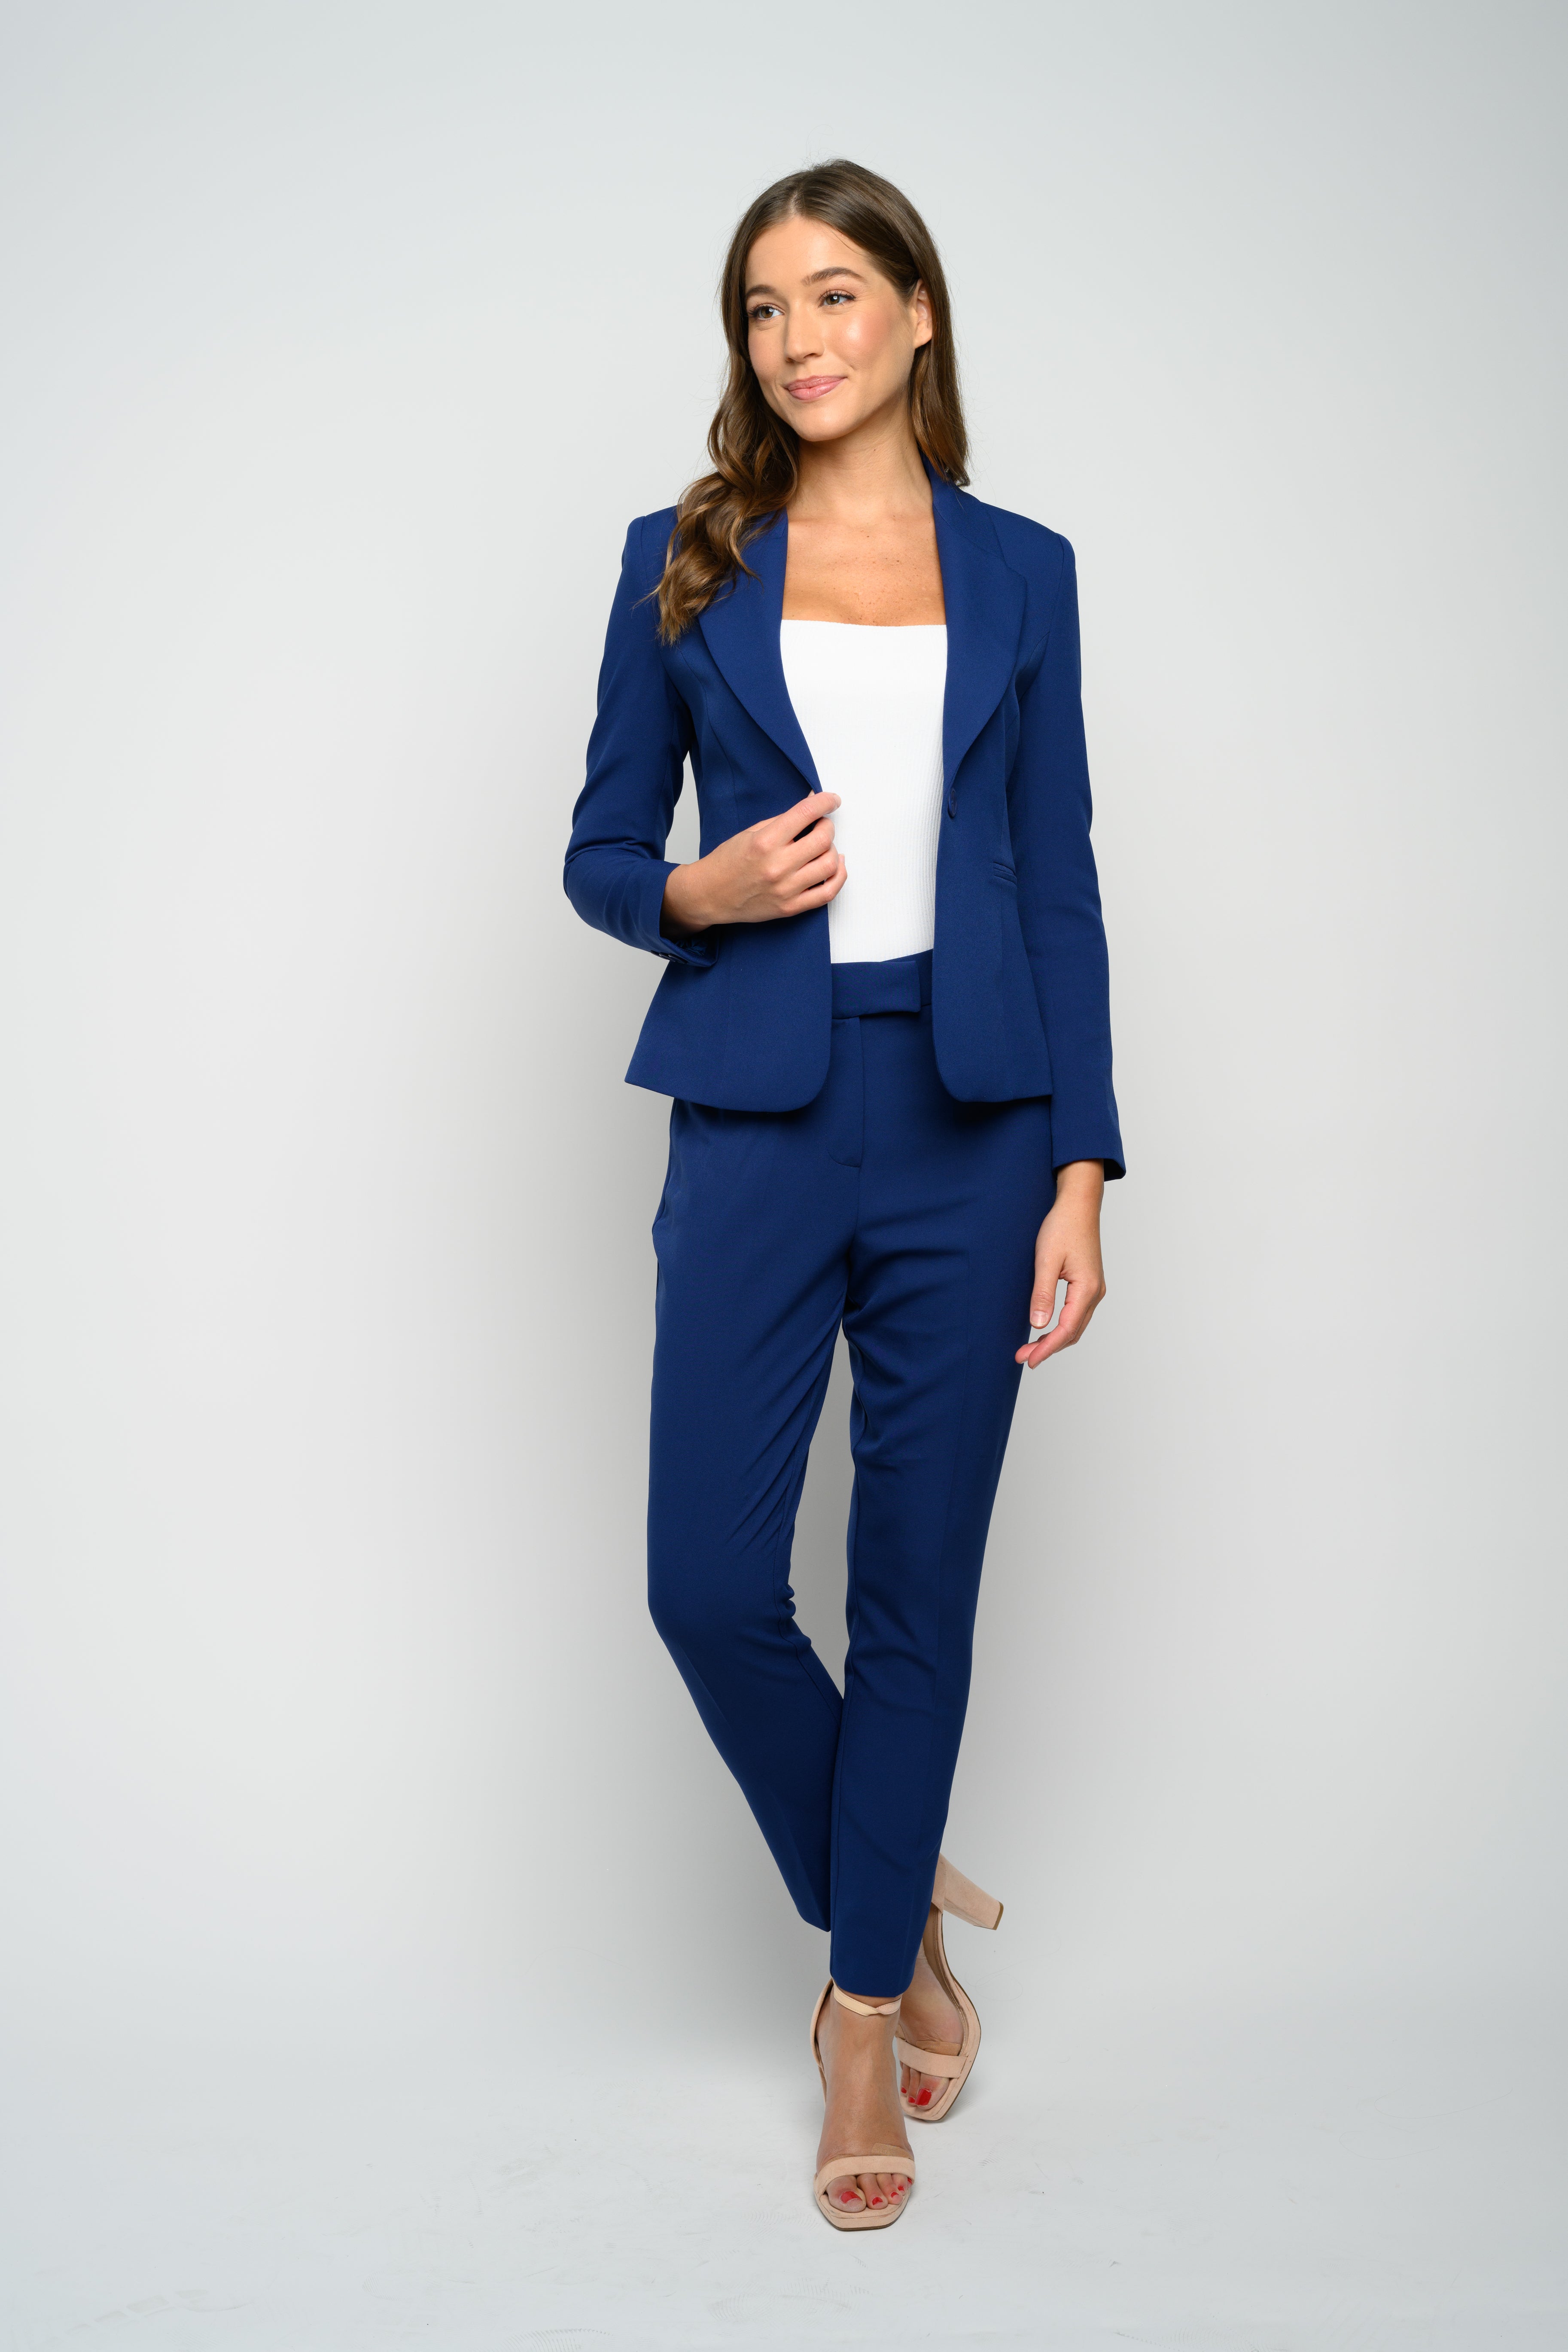 Business Formal Women's Dark blue Suit – The Ambition Collective